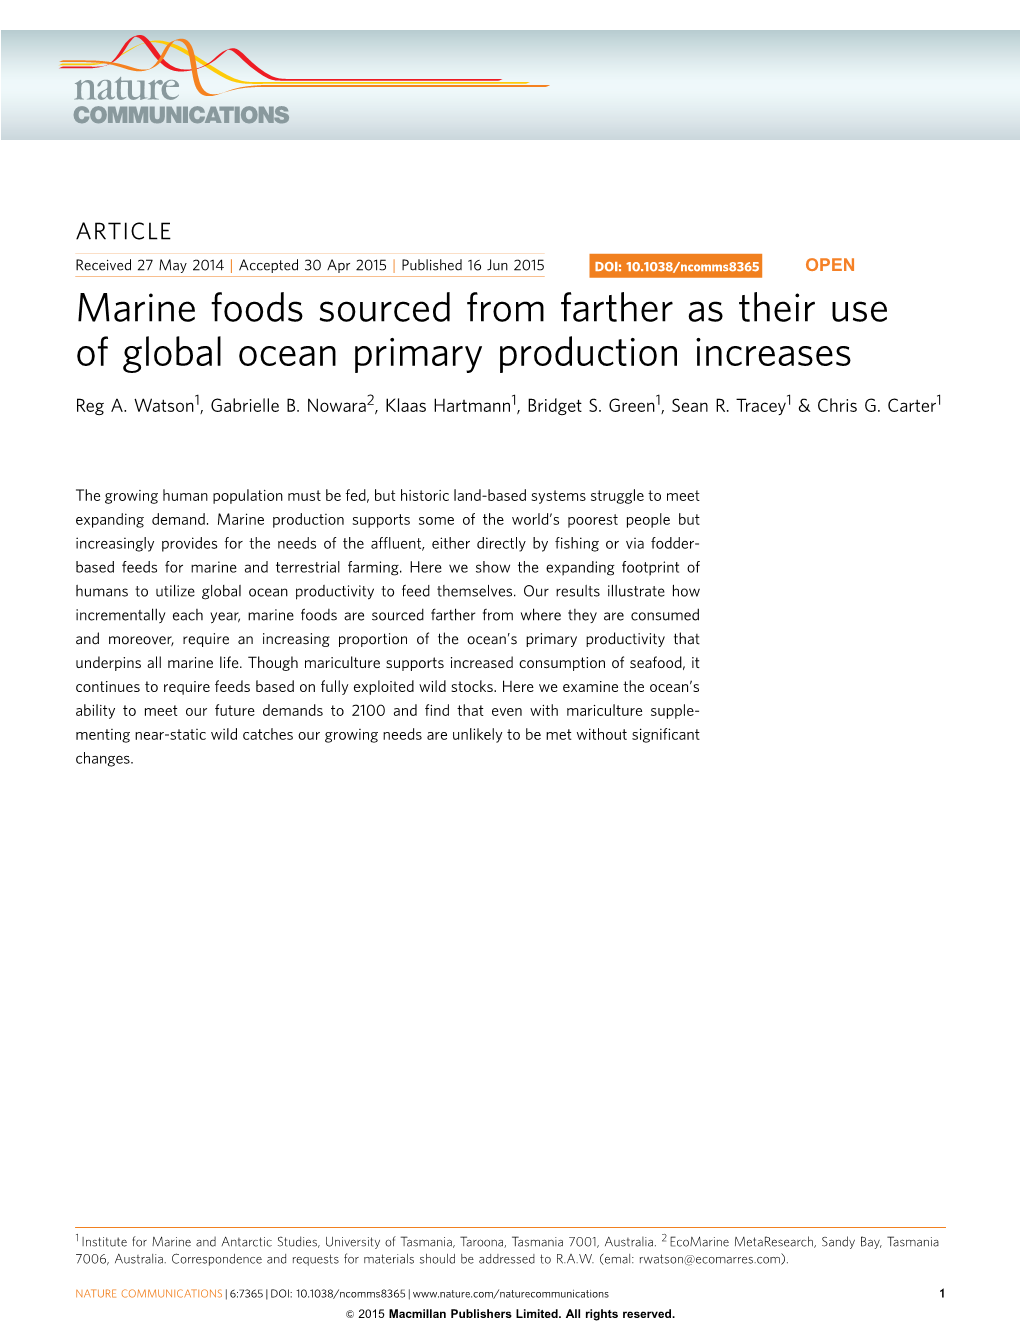 Marine Foods Sourced from Farther As Their Use of Global Ocean Primary Production Increases